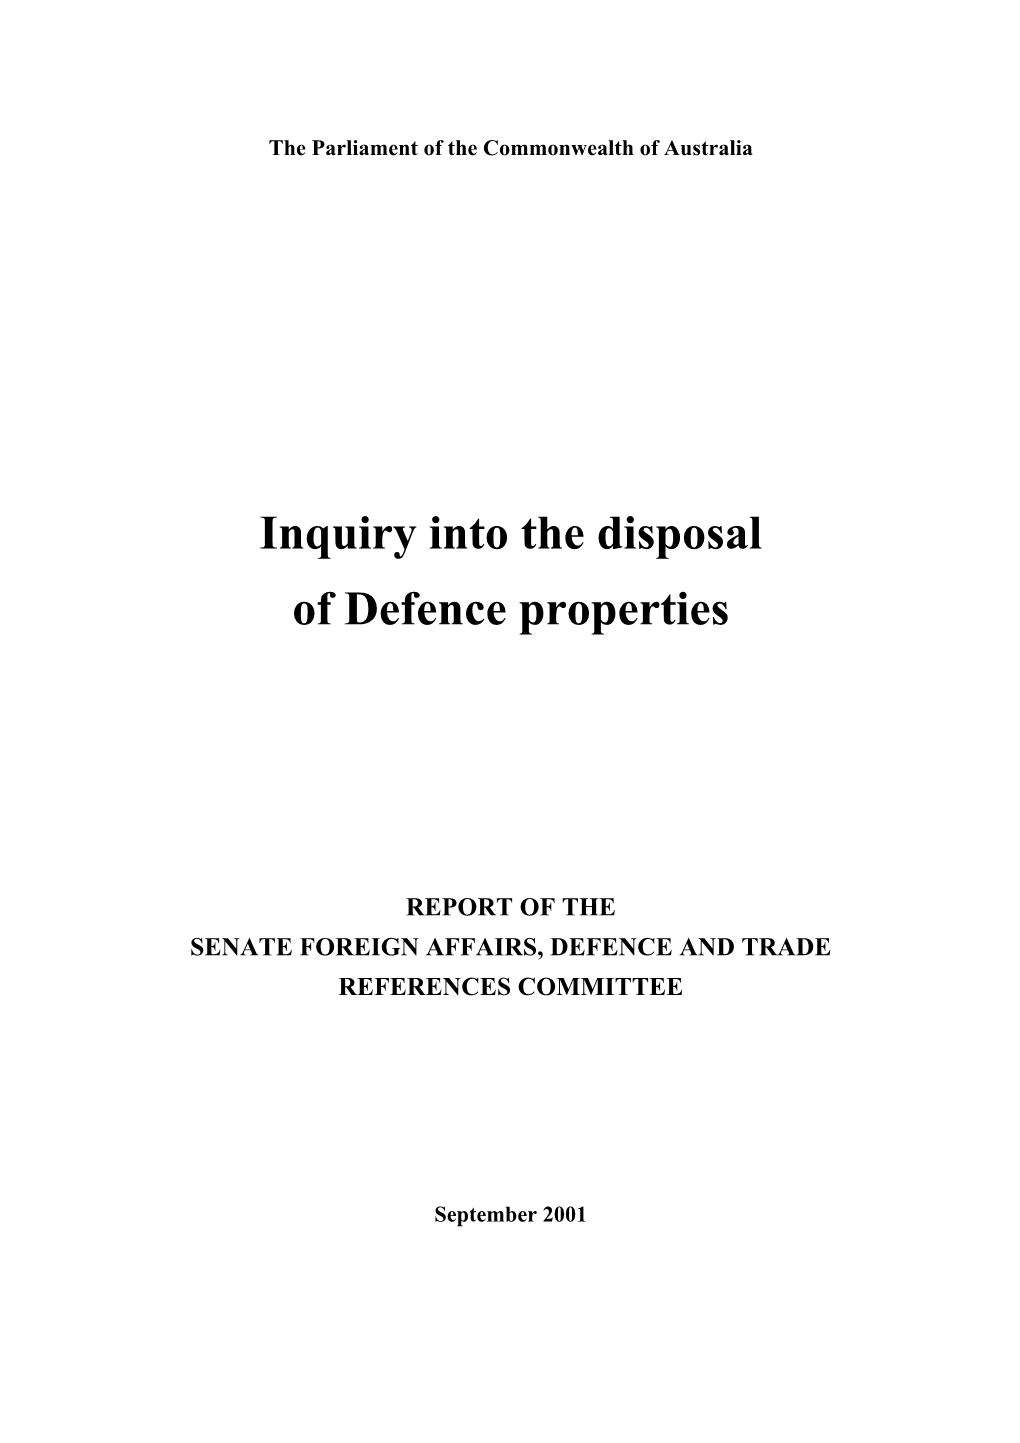 Report of the Senate Foreign Affairs, Defence and Trade References Committee